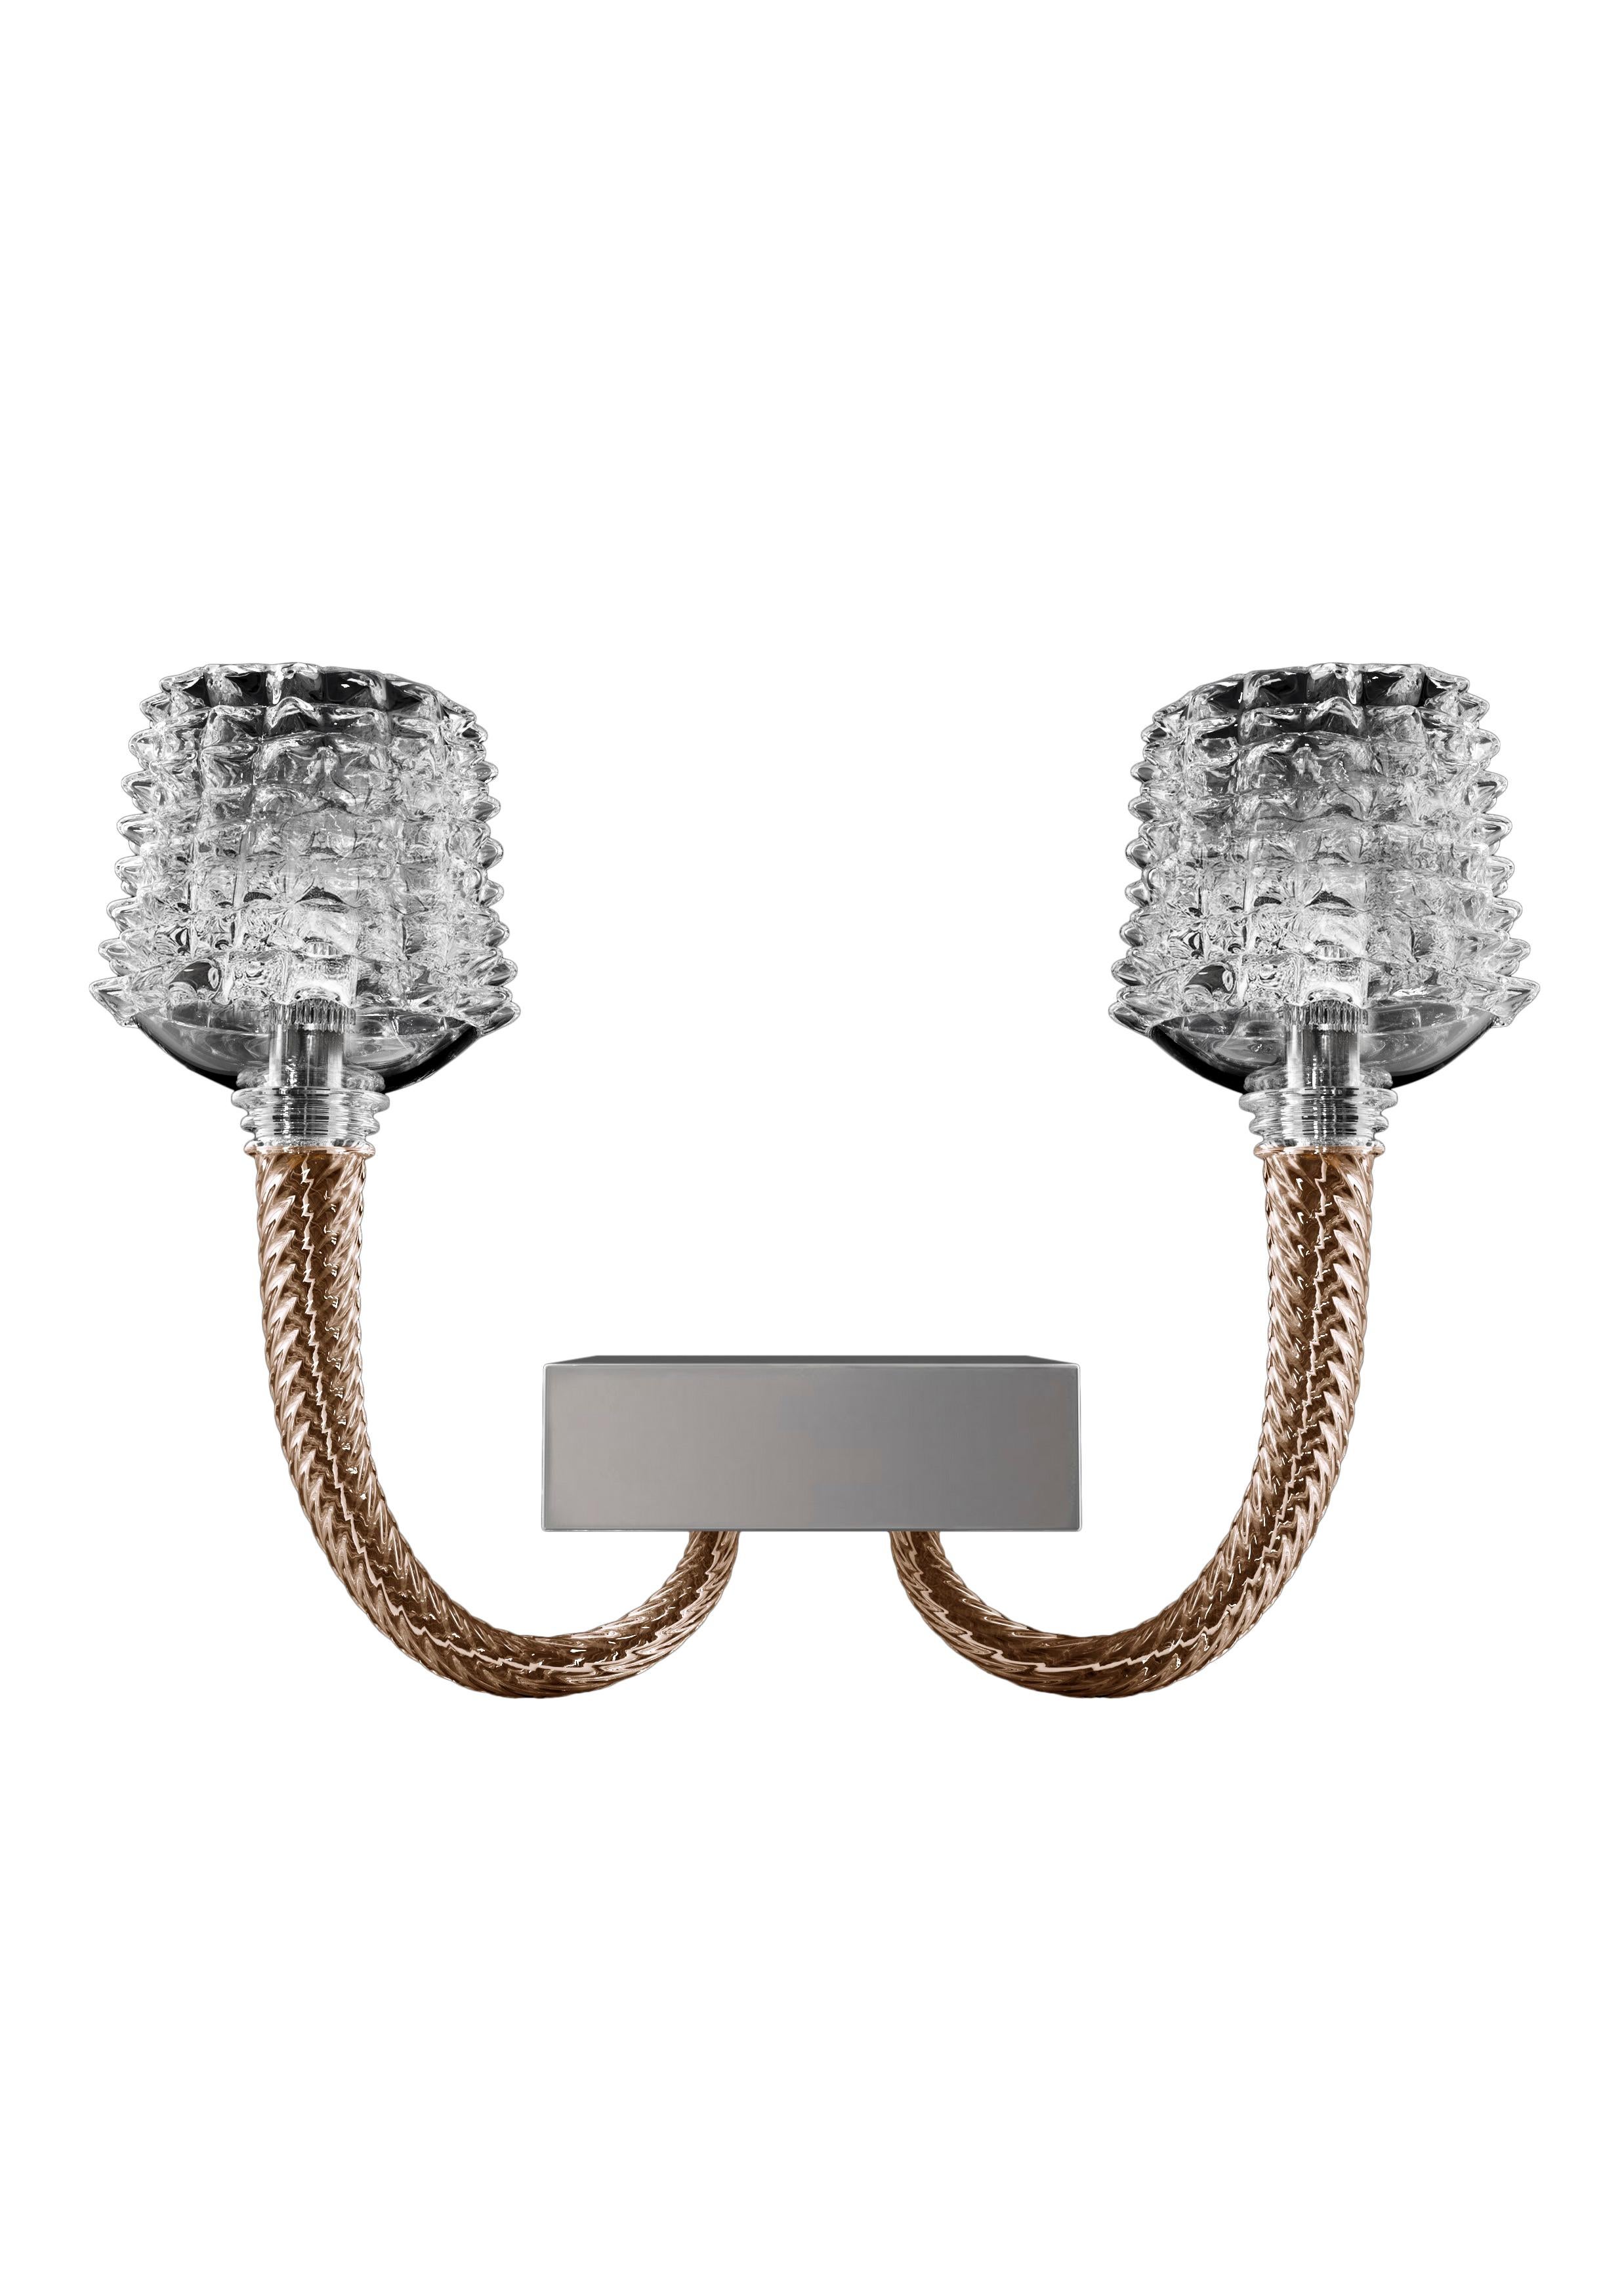 Brown (Brown_BW) Florian 5717 02 Wall Sconce in Glass with Polished Chrome Finish, by Barovier